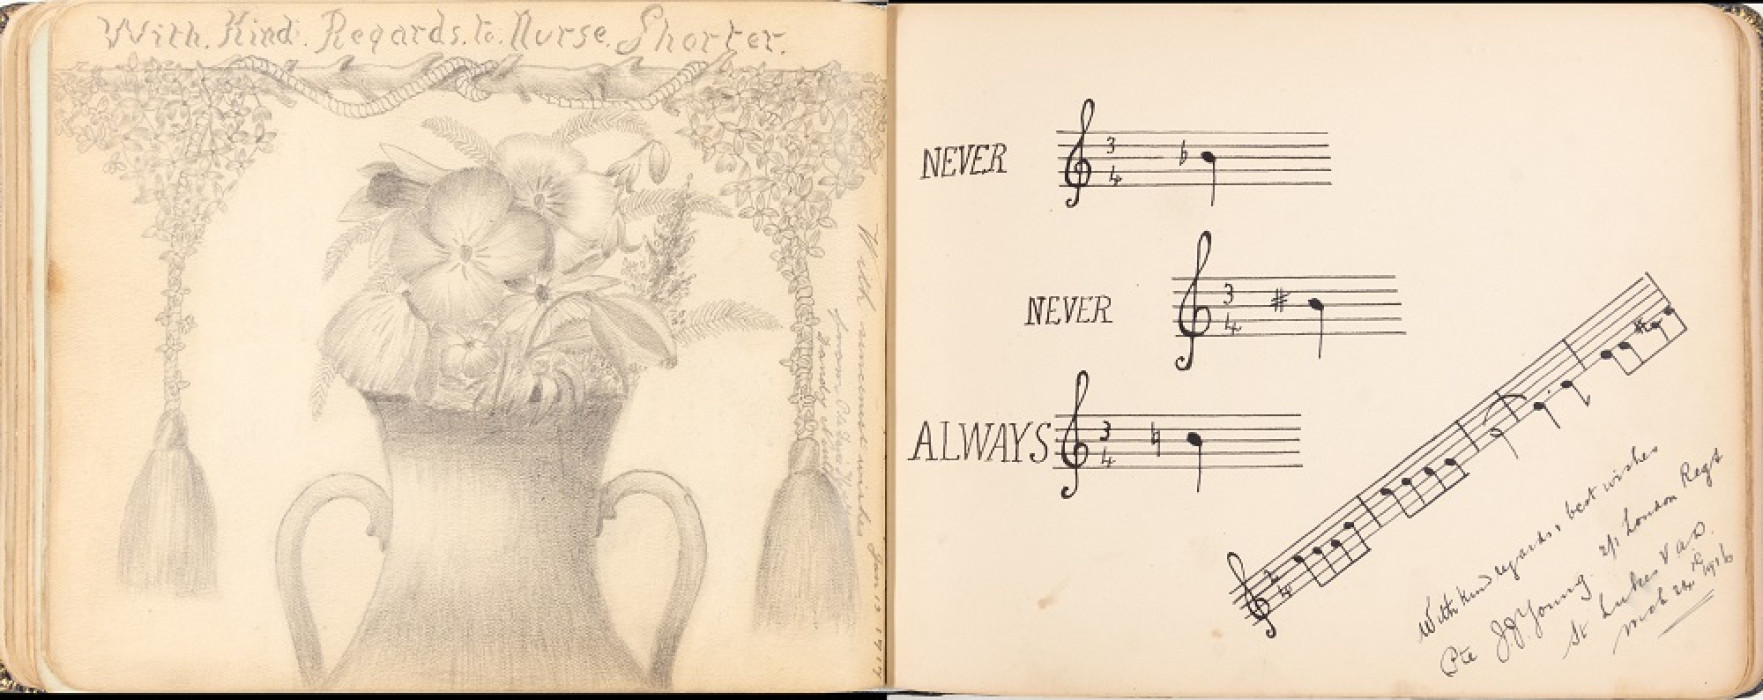 Sketch drawing of a vase with flowers and musical notes from page in an album c. 1915 ref. D/EX2912/1